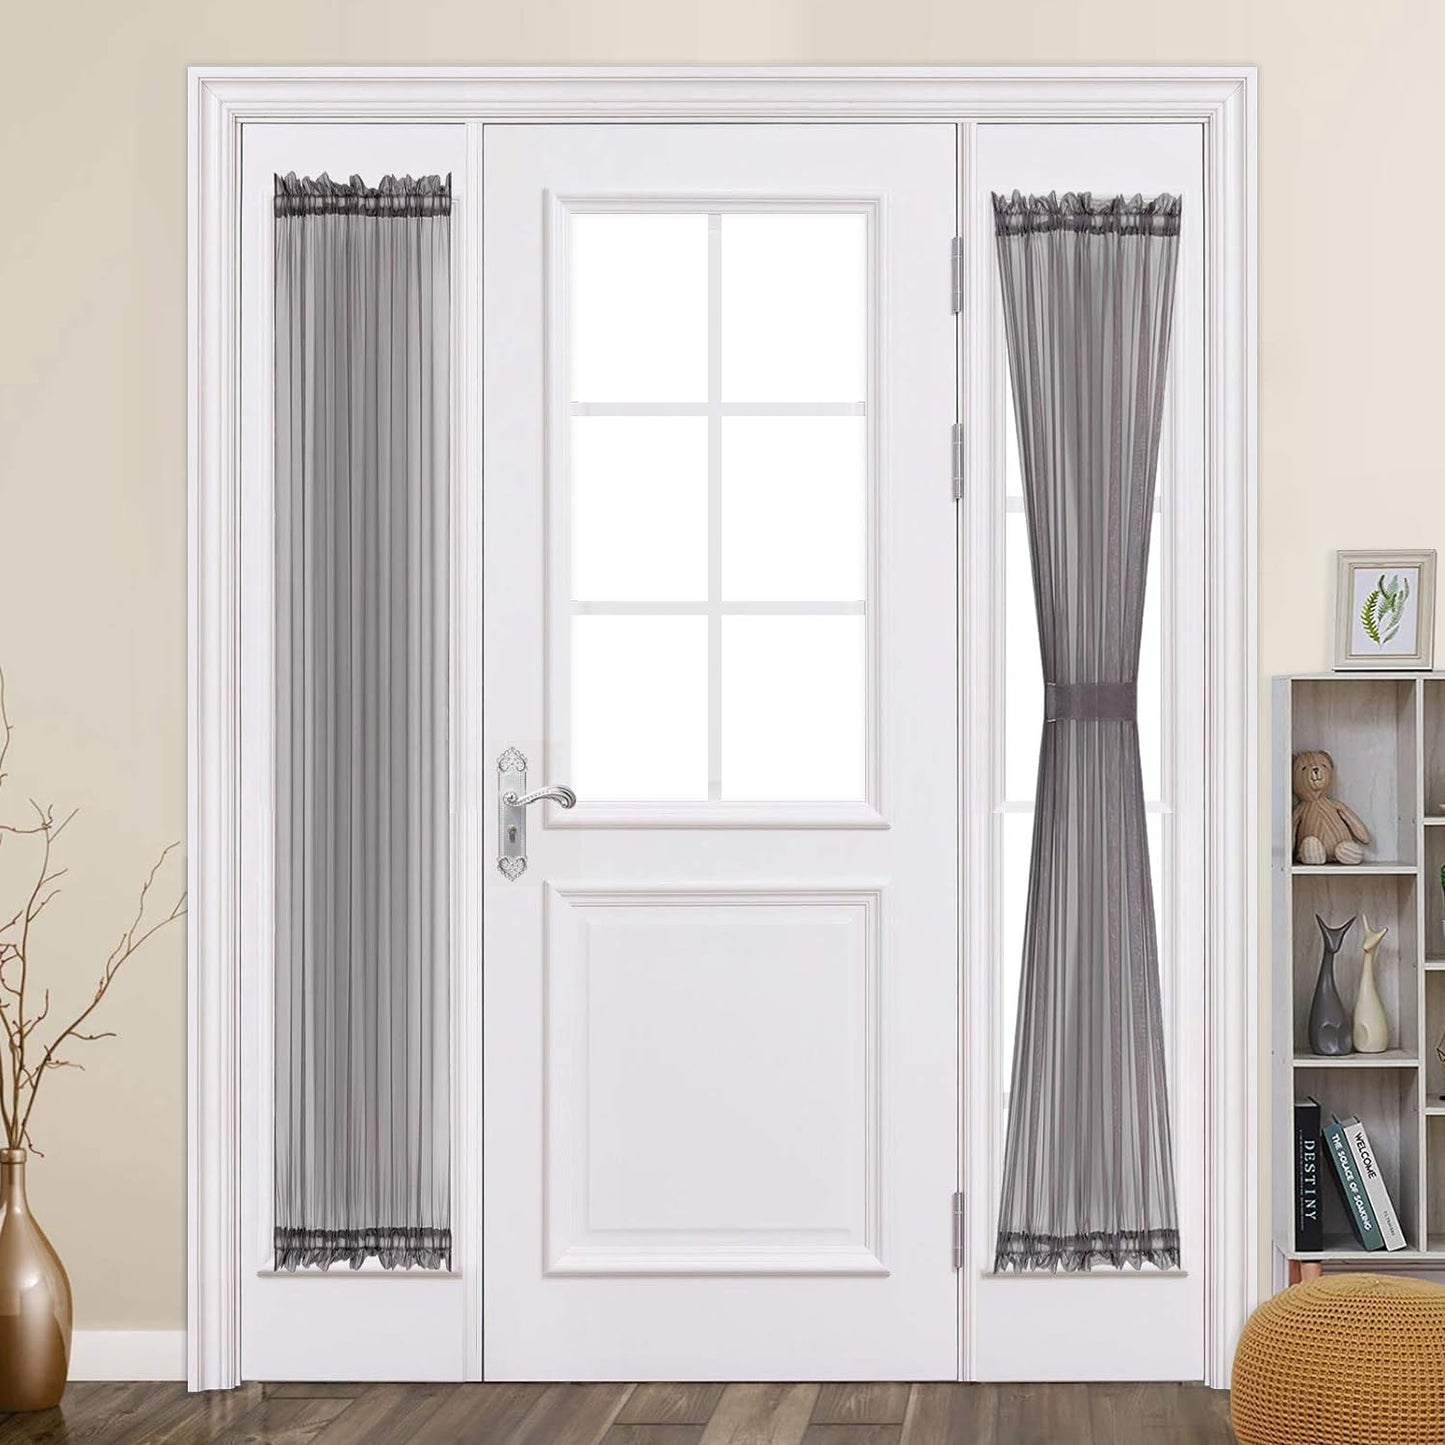 MIULEE French Door Sheer Curtains for Front Back Patio Glass Door Light Filtering Window Treatment with 2 Tiebacks 54 Wide and 72 Inches Length, White, Set of 2  MIULEE   